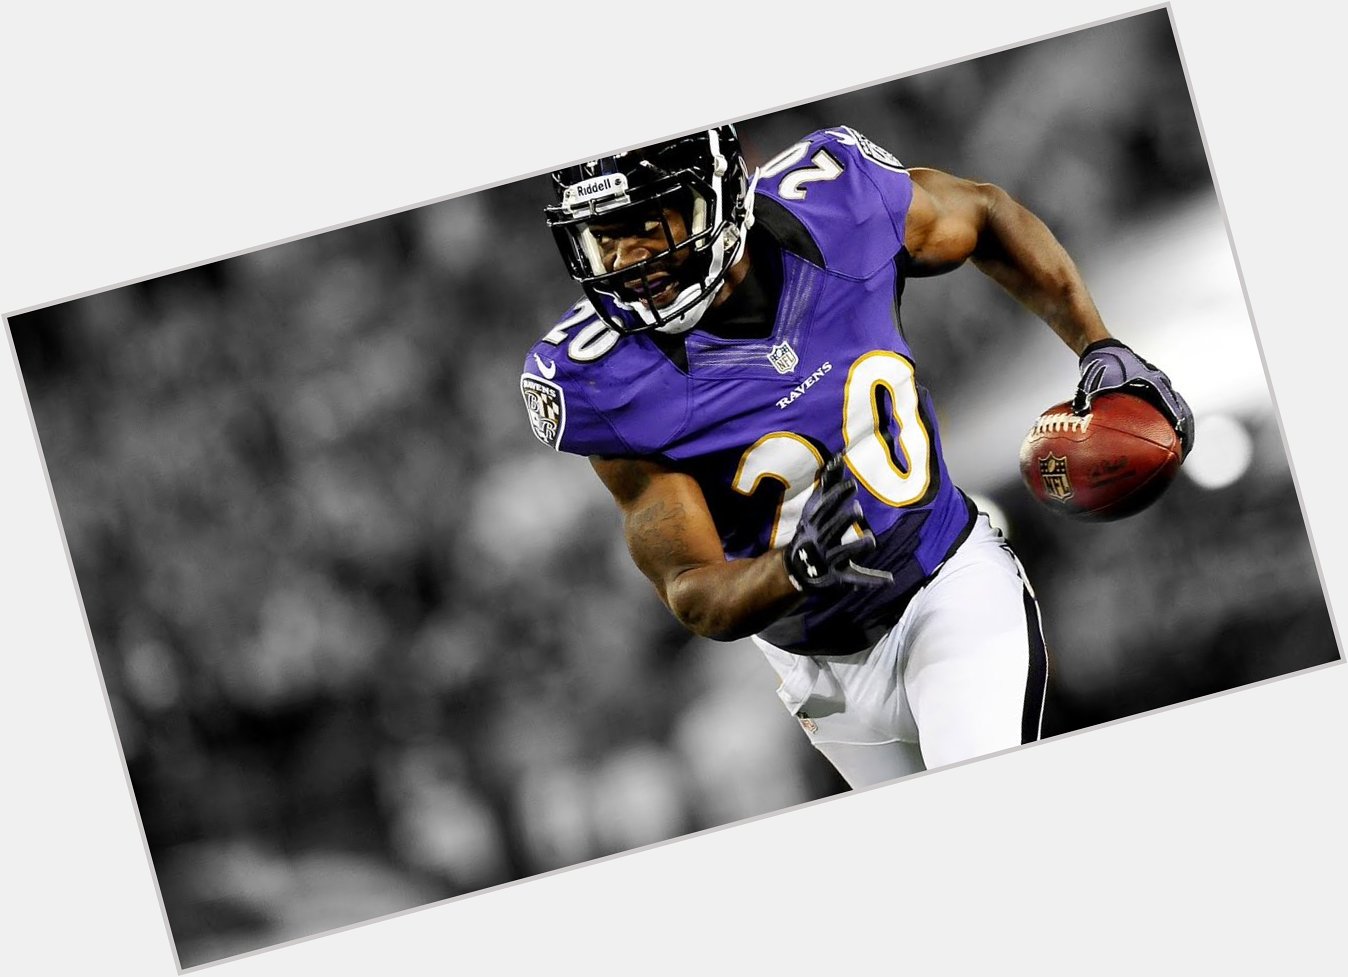 Happy Birthday to Ed Reed, who turns 39 today! 